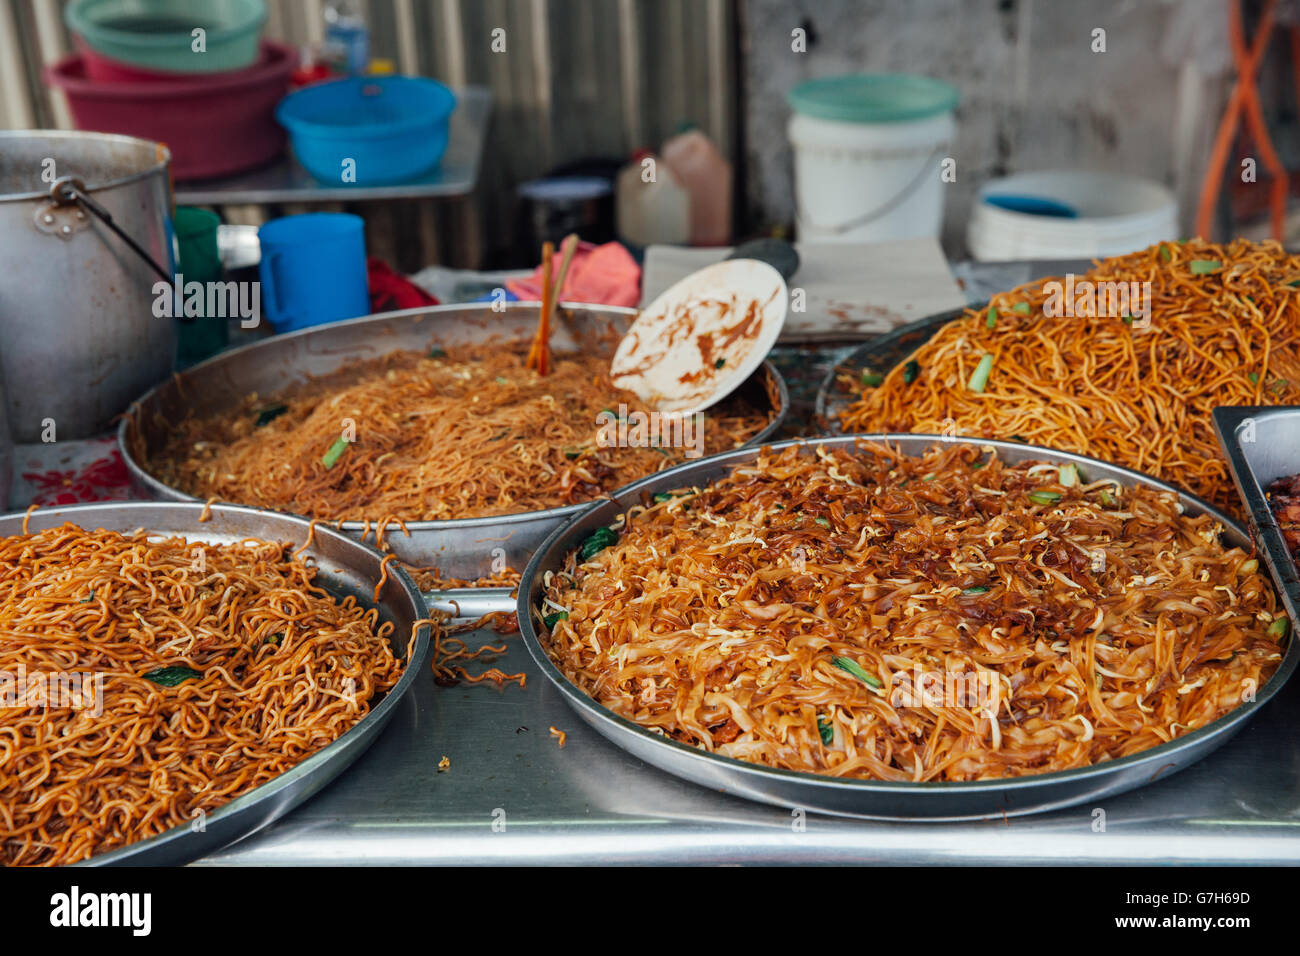 Kway teow noodles fritti presso Kimberly Street Food il Mercato Notturno, George Town, Penang, Malaysia. Foto Stock